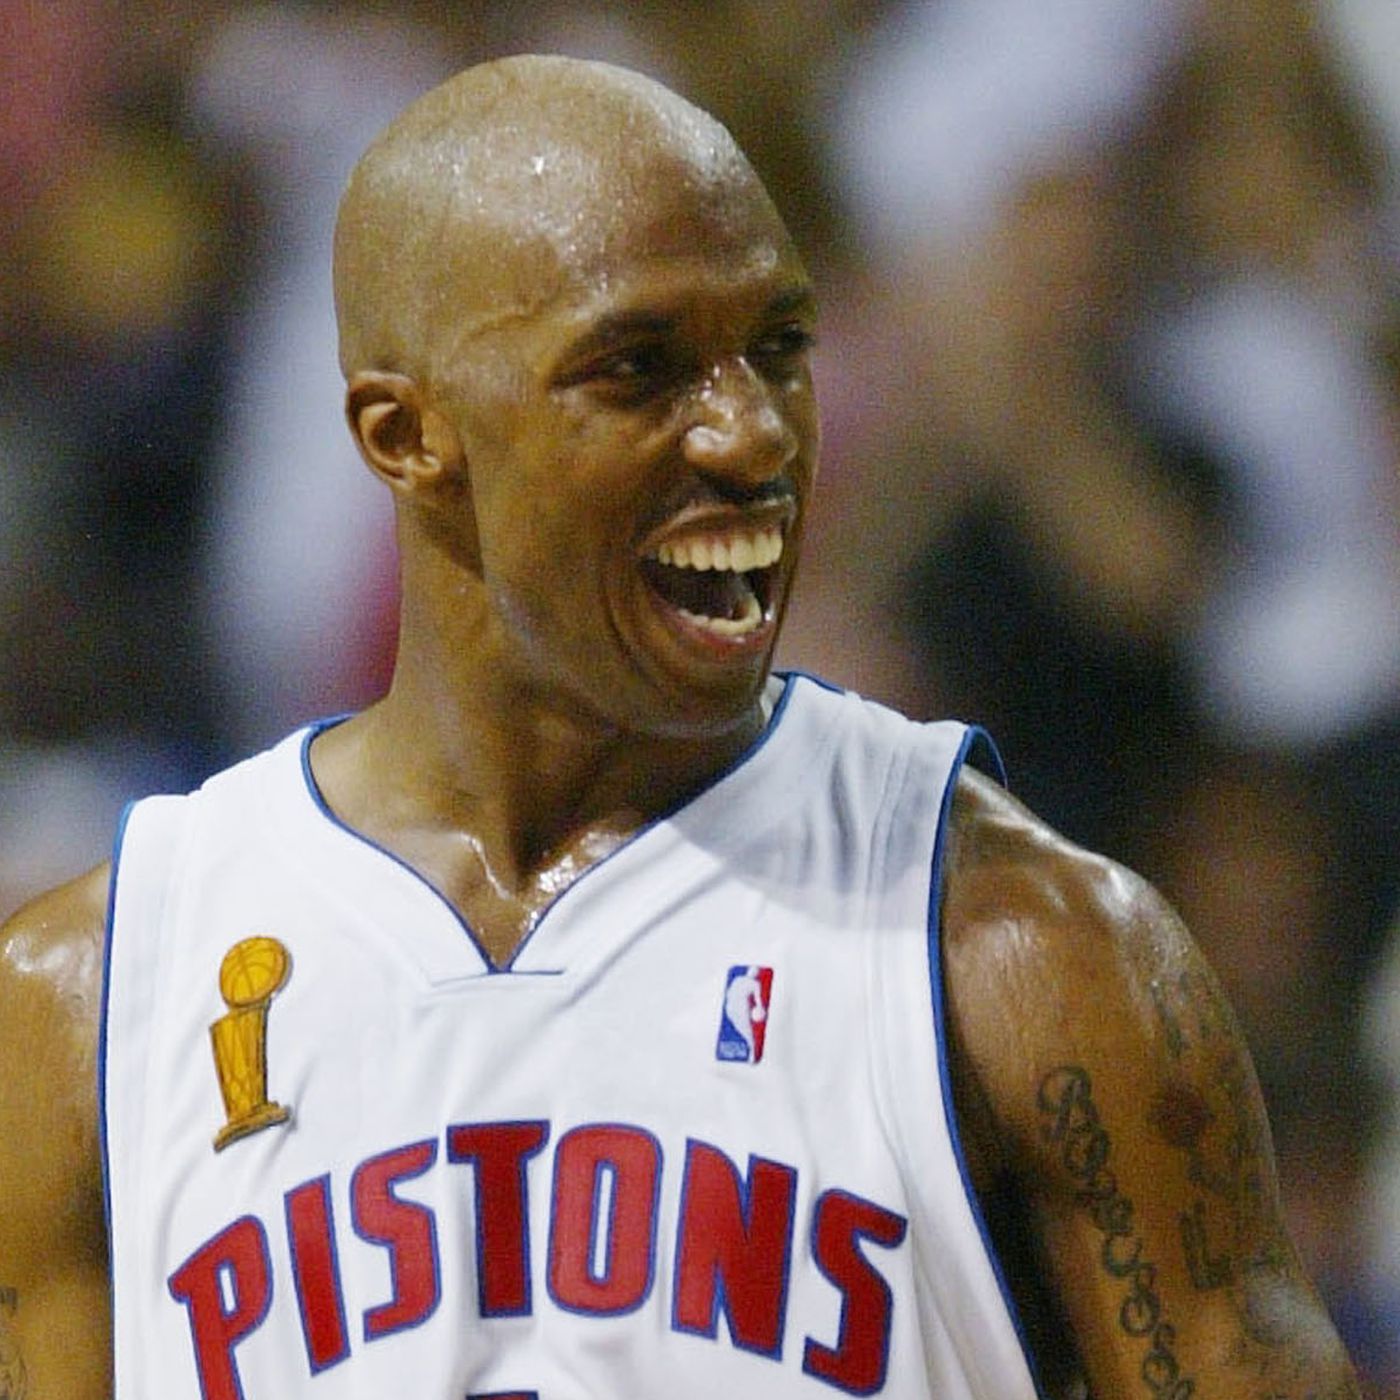 Chauncey Billups was the best point guard in the NBA from 2002-'08 Bad Boys